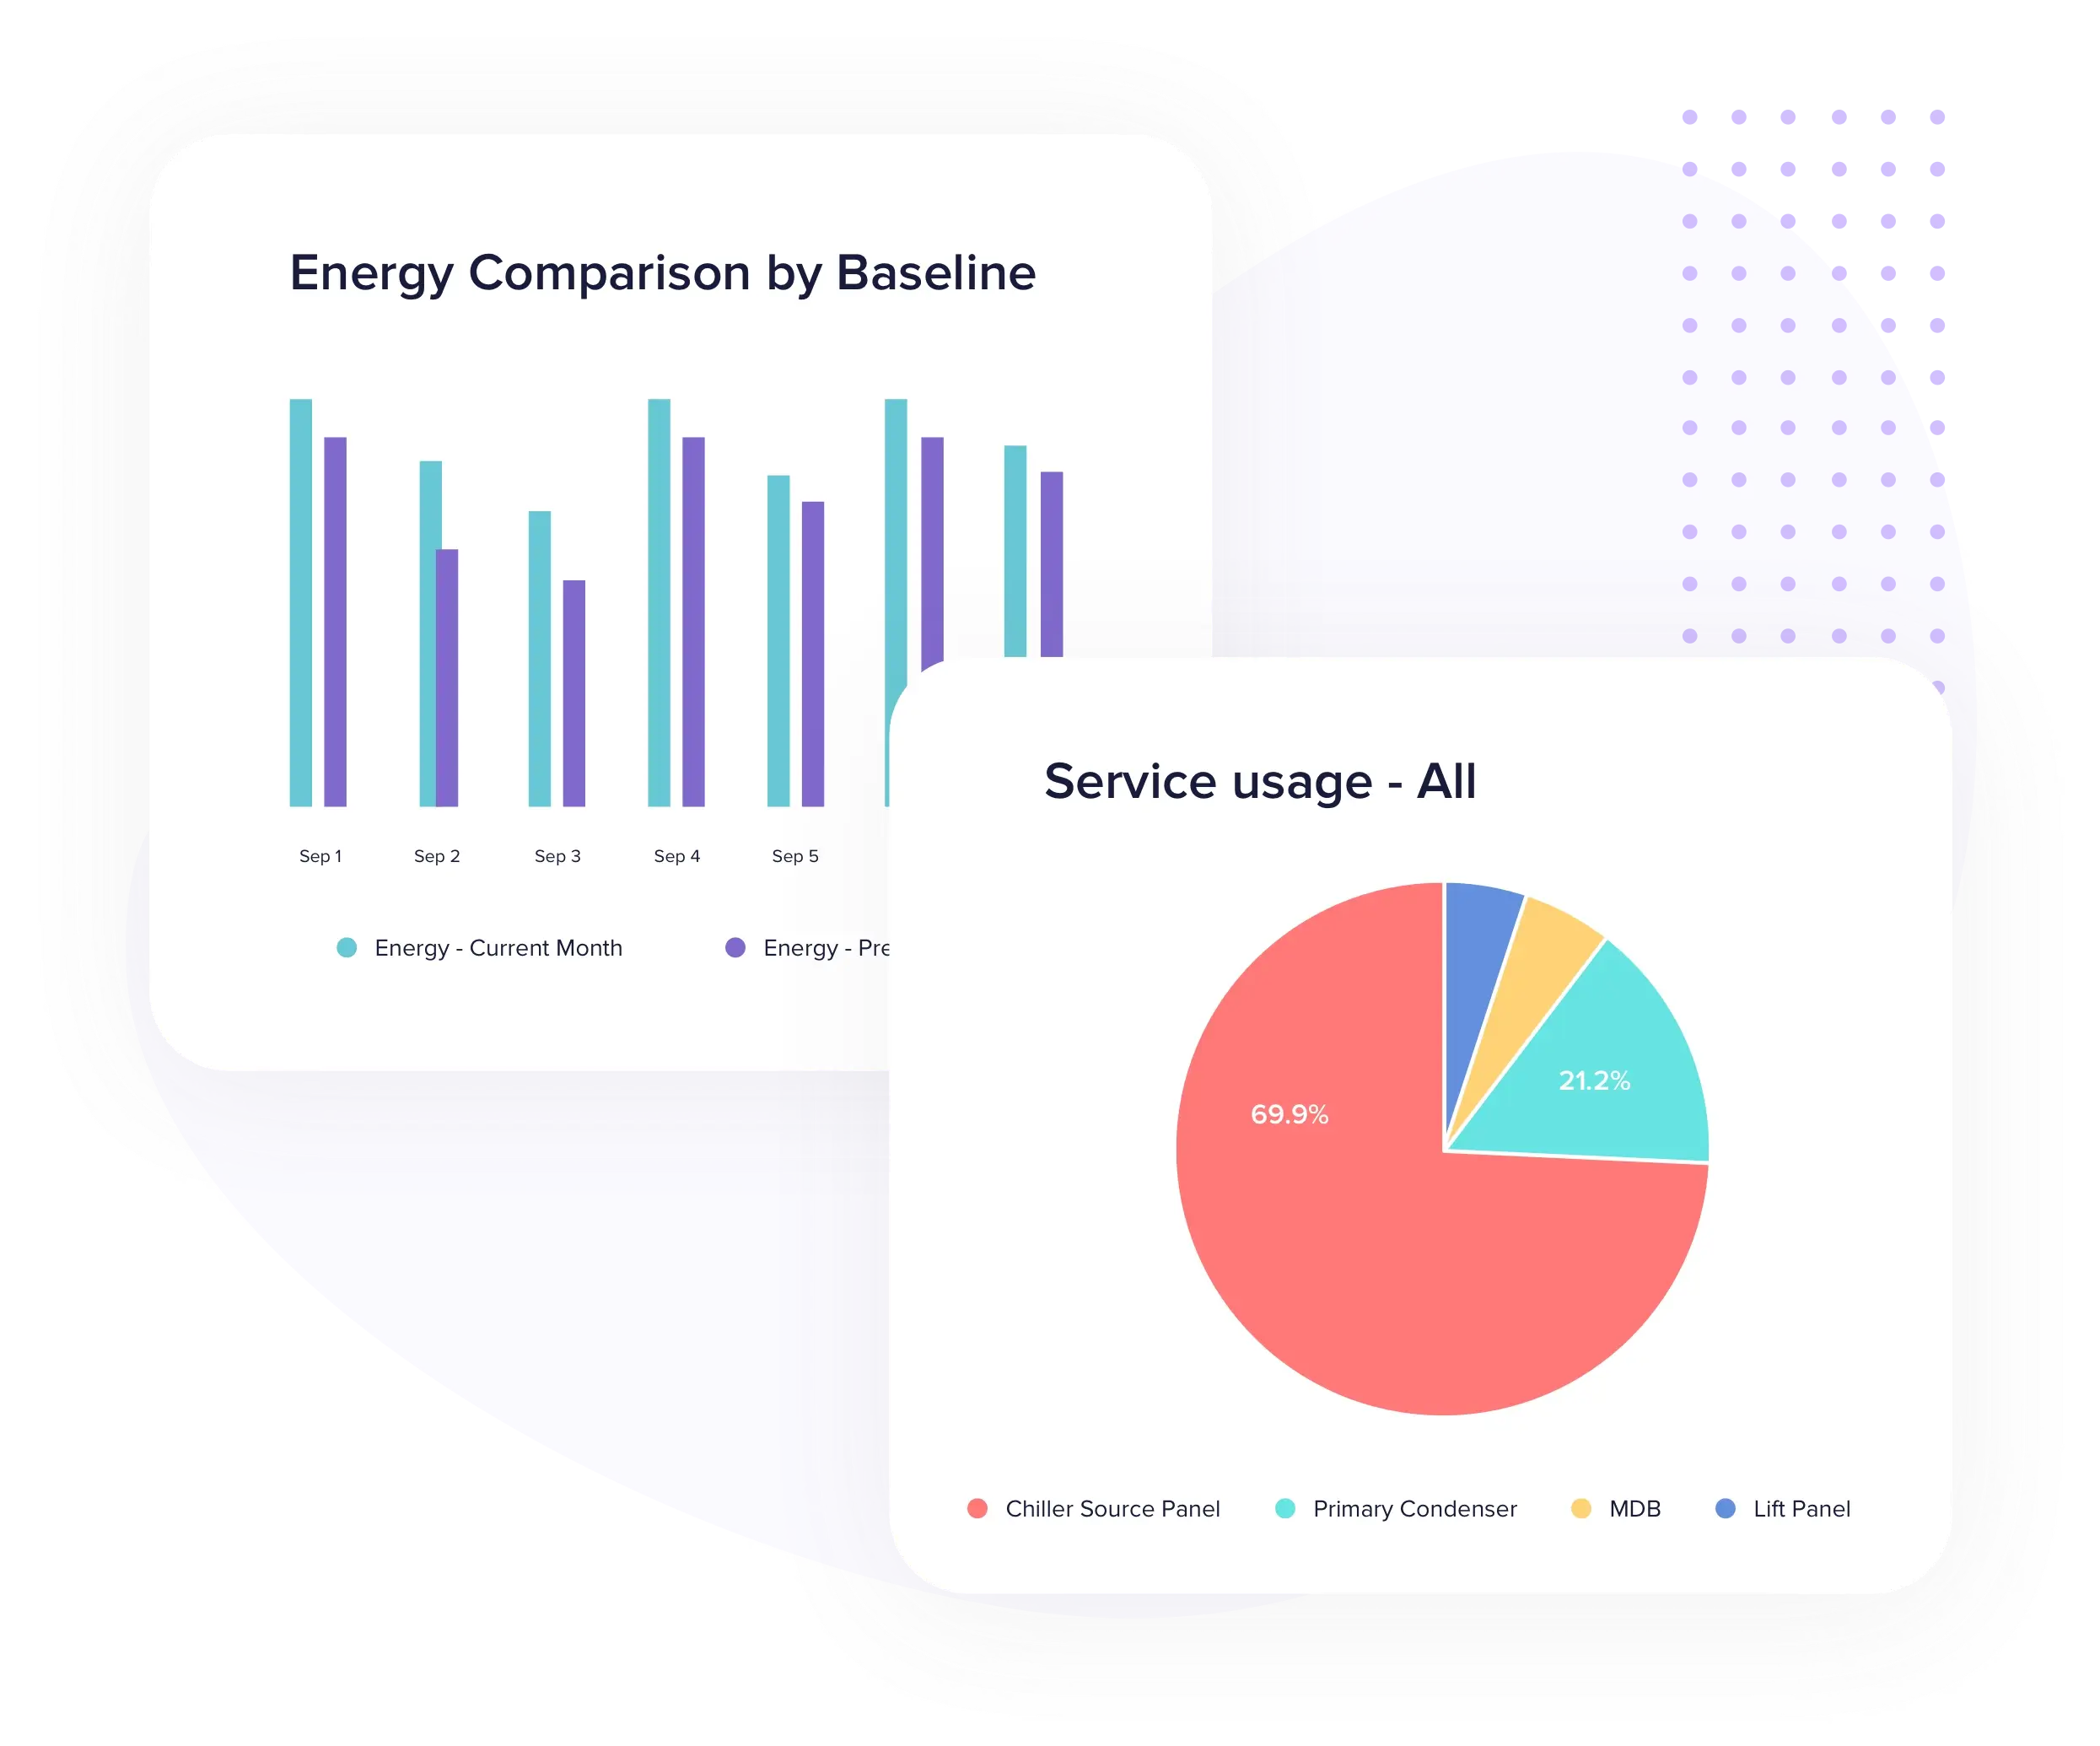 Enhance stakeholder engagement with graphs such as energy consumption comparisions by baseline, service usage by asset, and moreEnhance stakeholder engagement with graphs such as energy consumption comparisions by baseline, service usage by asset, and more